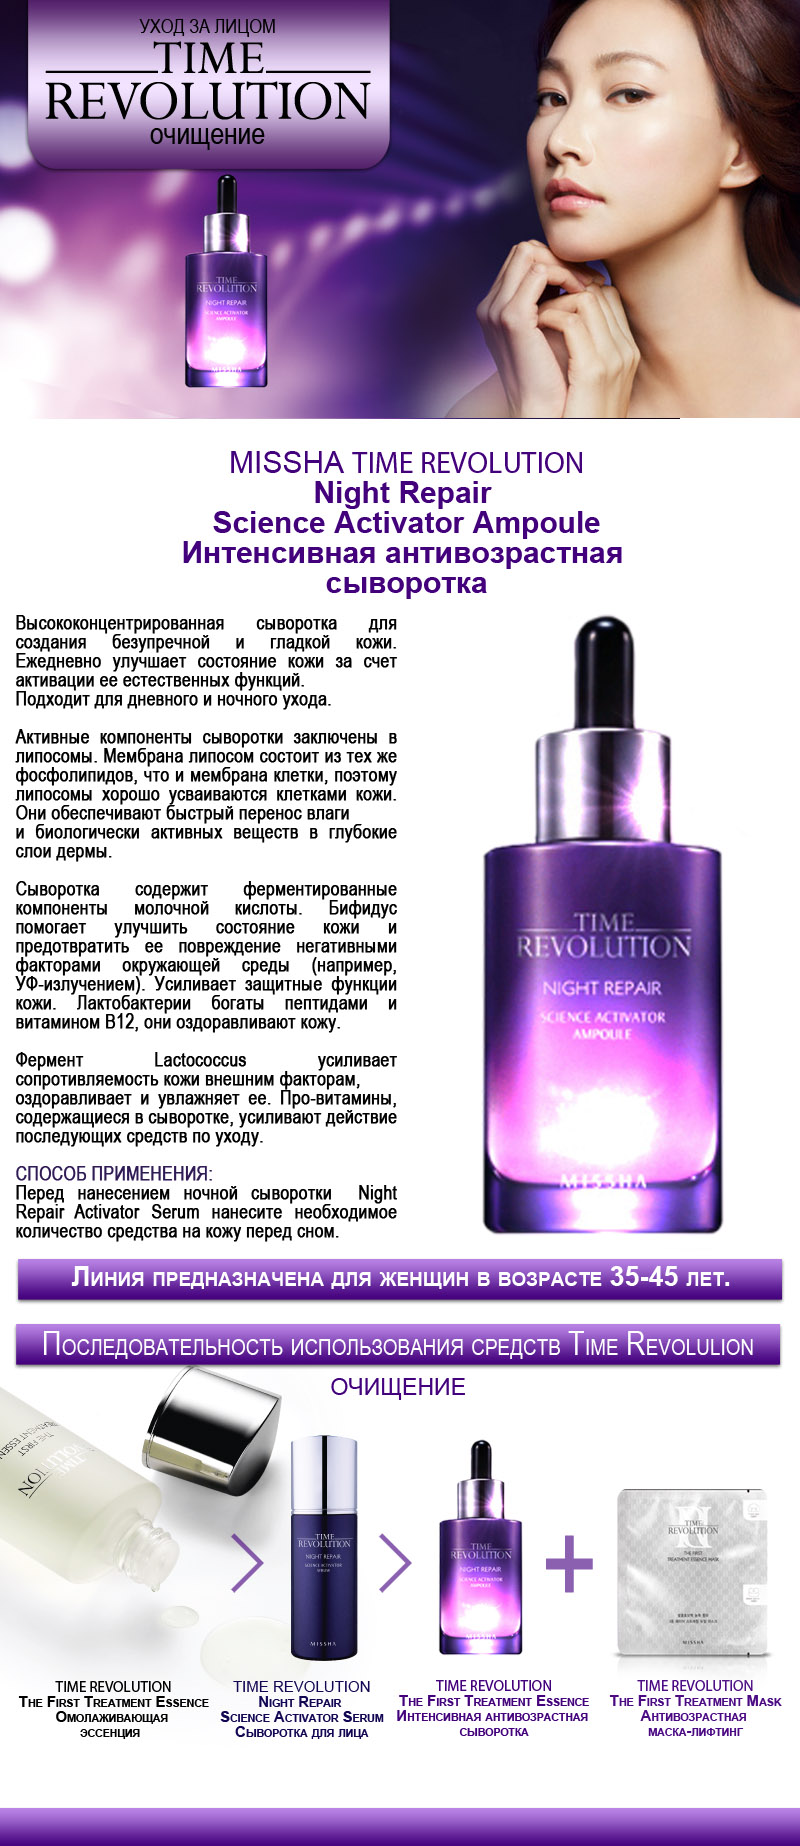 Time Revolution Night Repair Science Activator Ampoule 50 ml